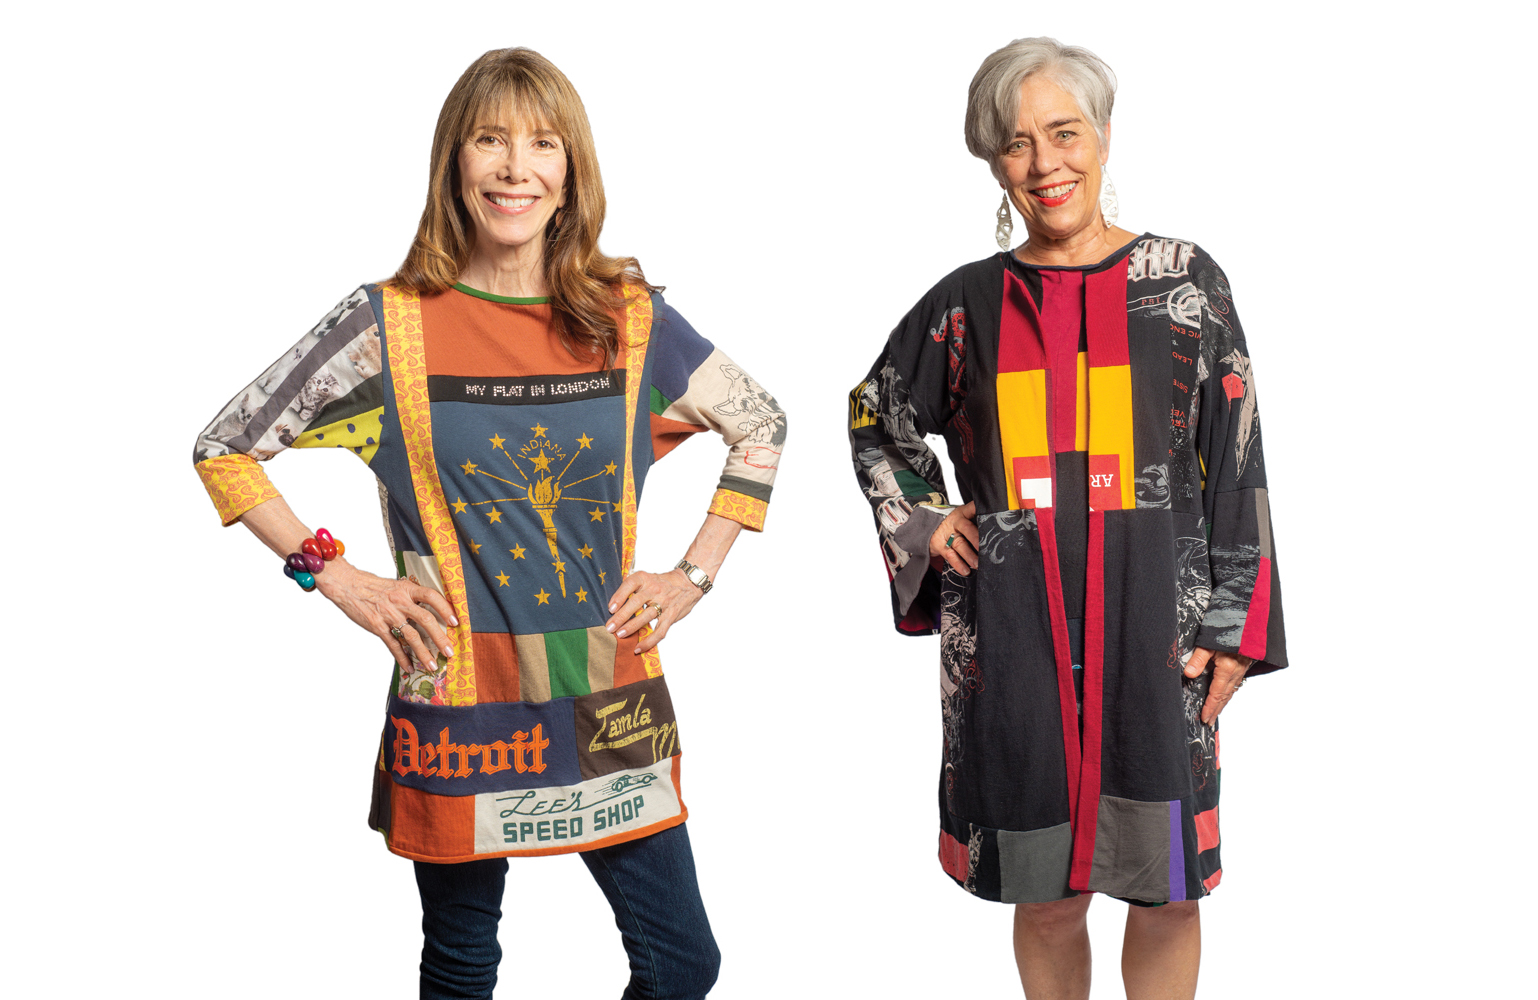 Jane Matranga (right) models a coat and dress ensemble she designed and constructed. The coat is reversible. Matranga created a fanciful patchwork tunic for Lee Sandweiss (left) out of T-shirts Sandweiss saved from places she has lived and messages with personal significance. Photos by Rodney Margison